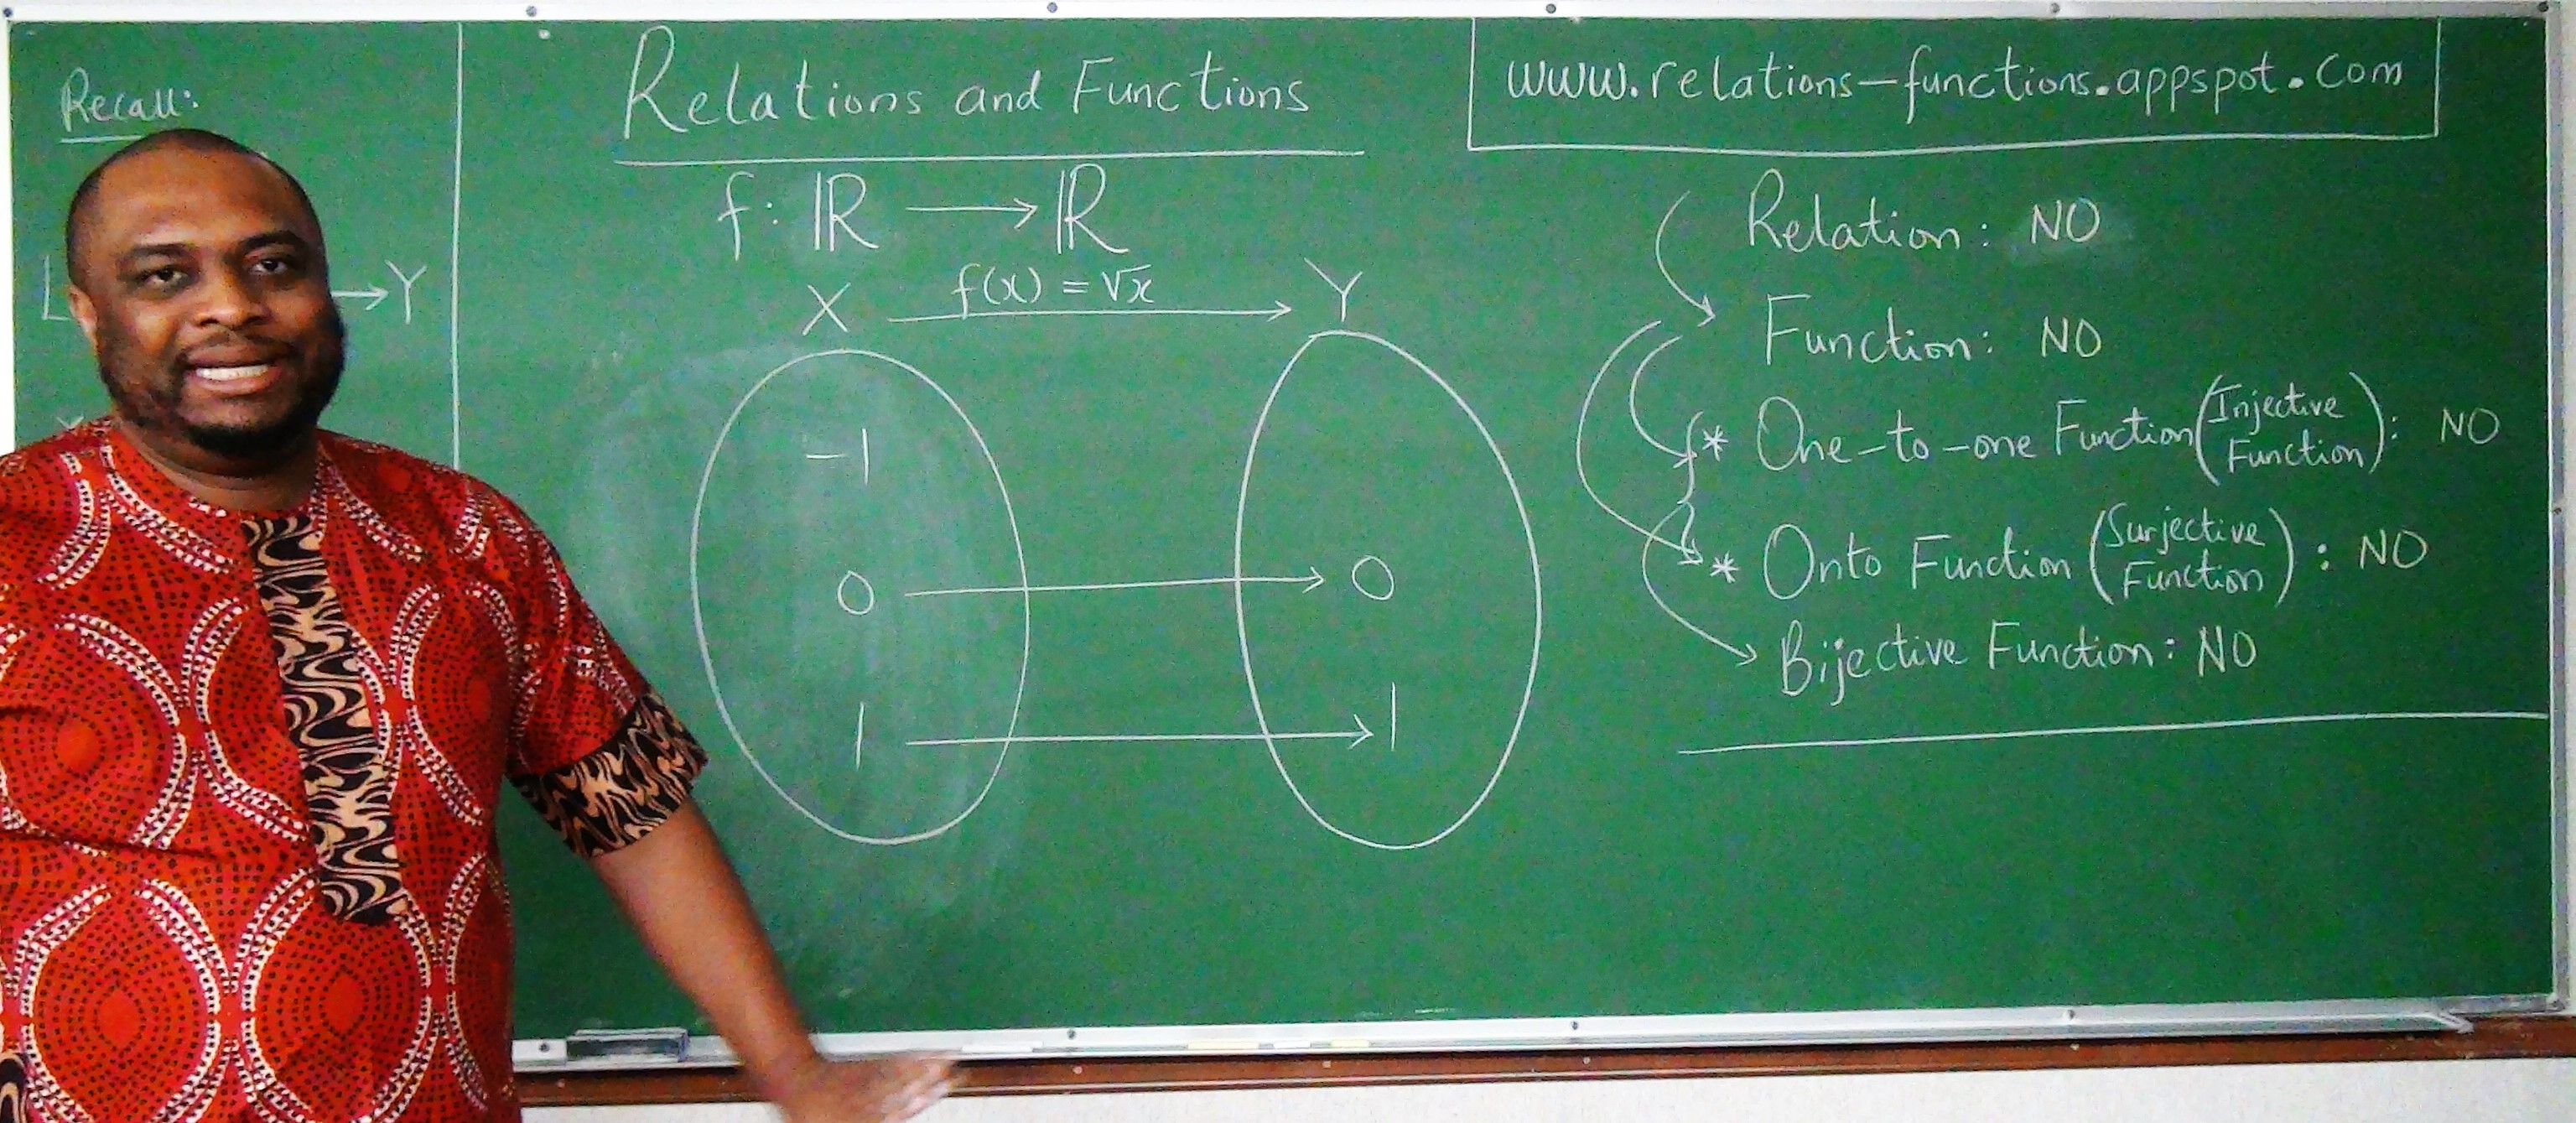 Relations and Functions 1